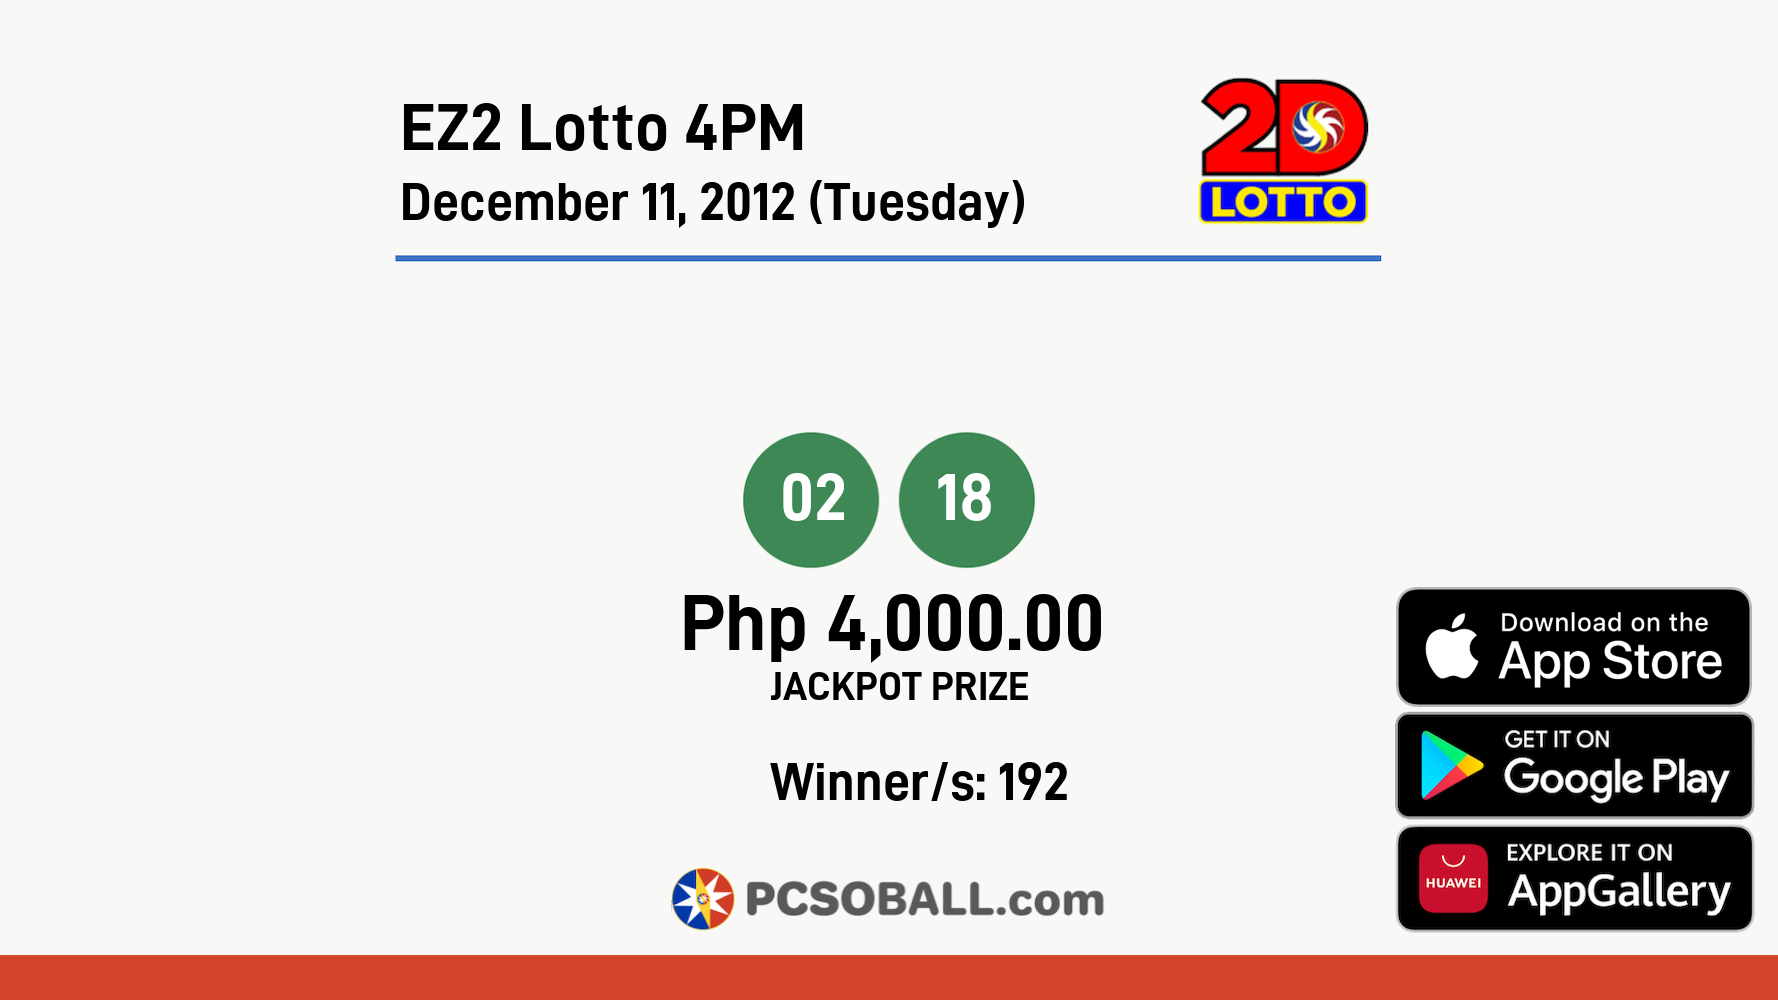 EZ2 Lotto 4PM December 11, 2012 (Tuesday) Result